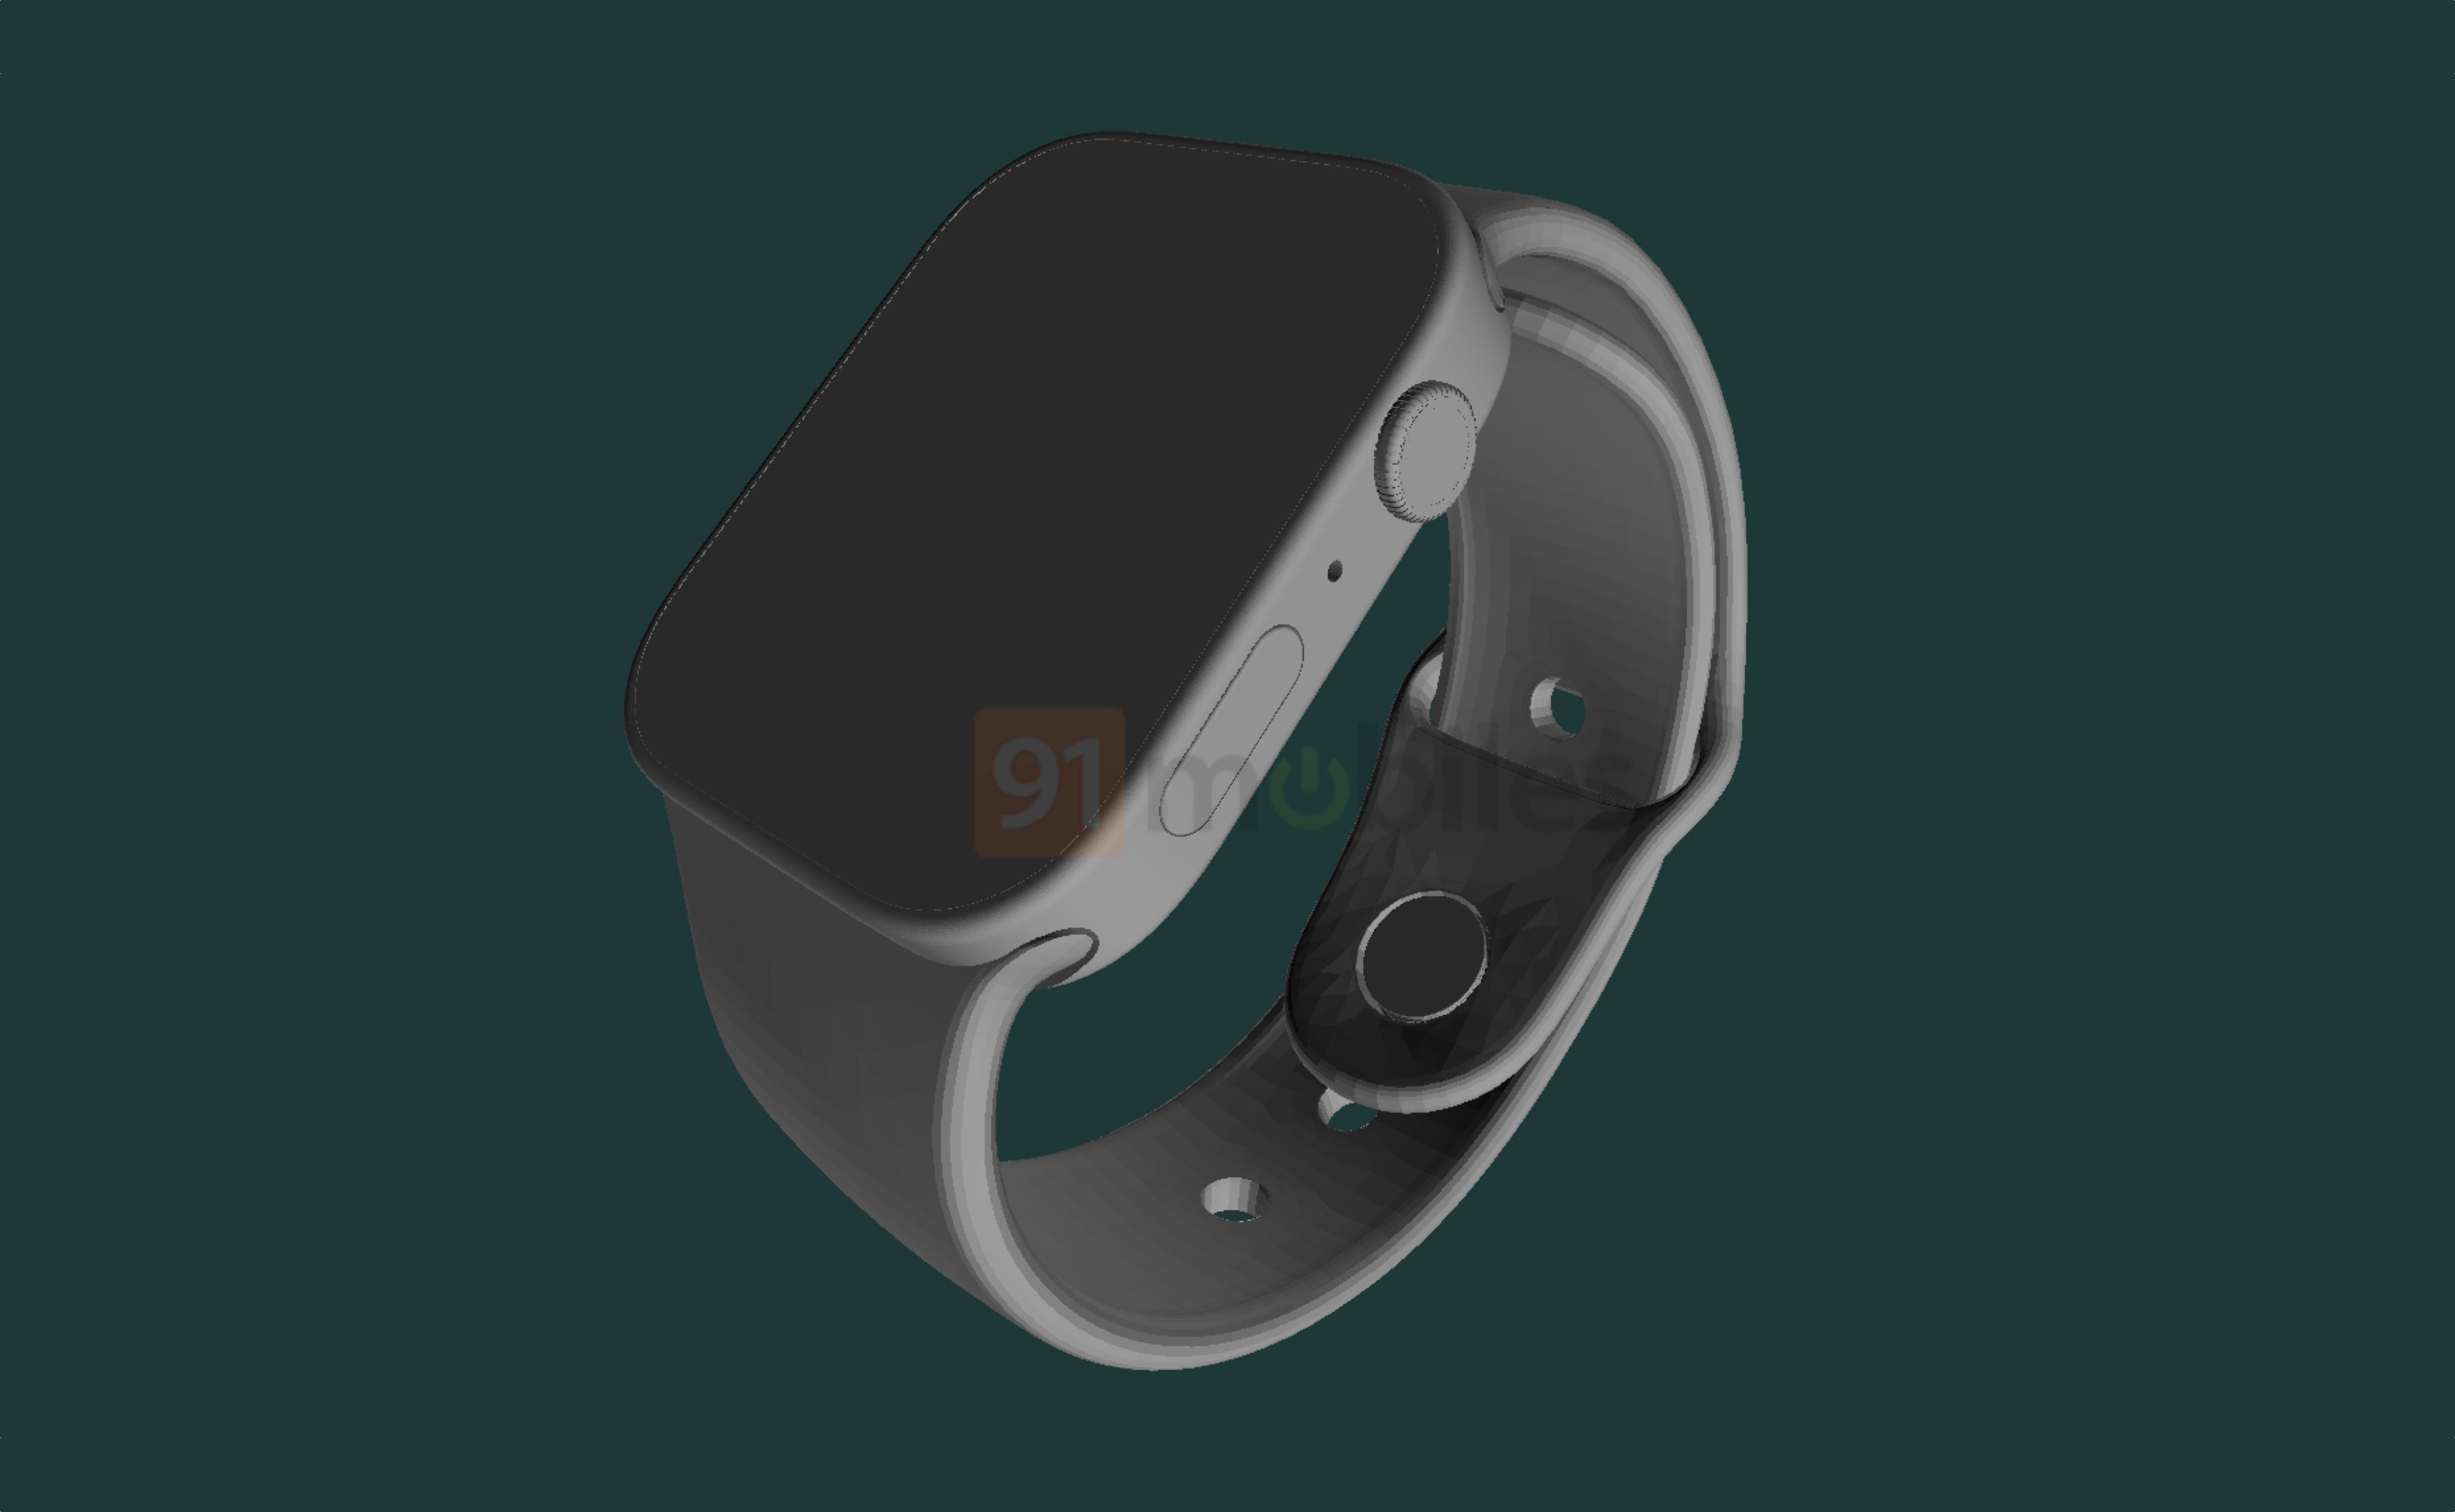 CAD models of Apple Watch Series 7 have surfaced online: the smartwatch will be designed in the style of iPhone 12